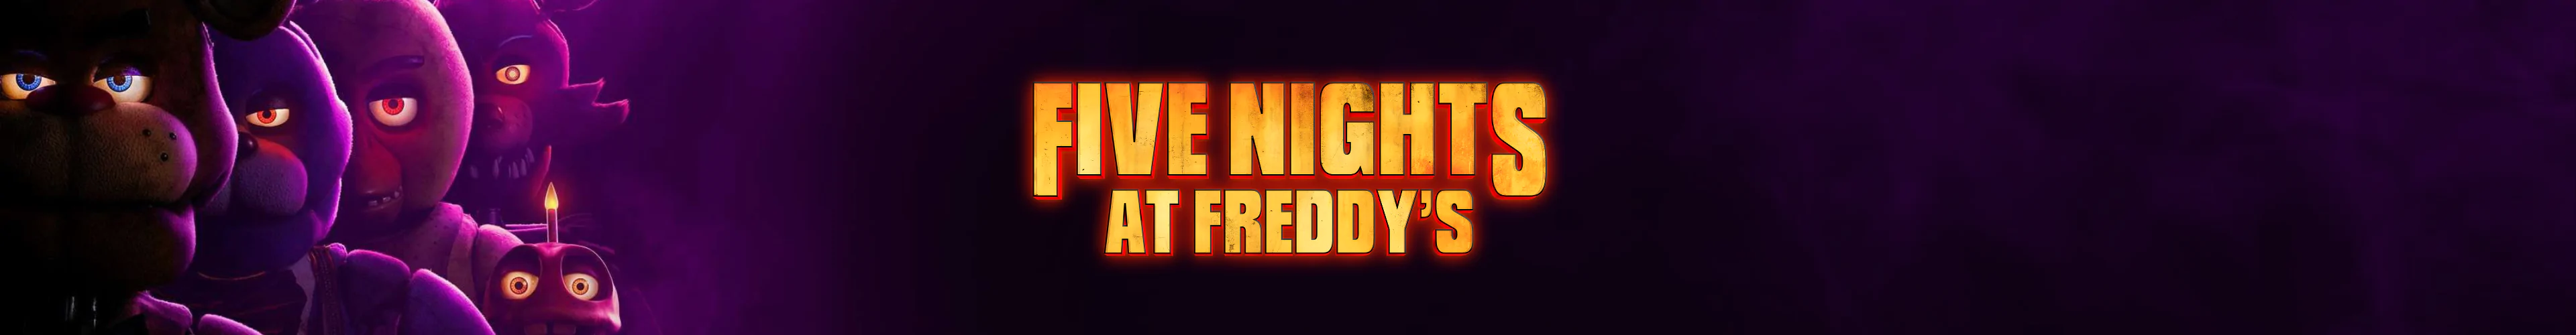 Five Nights at Freddy's figures banner